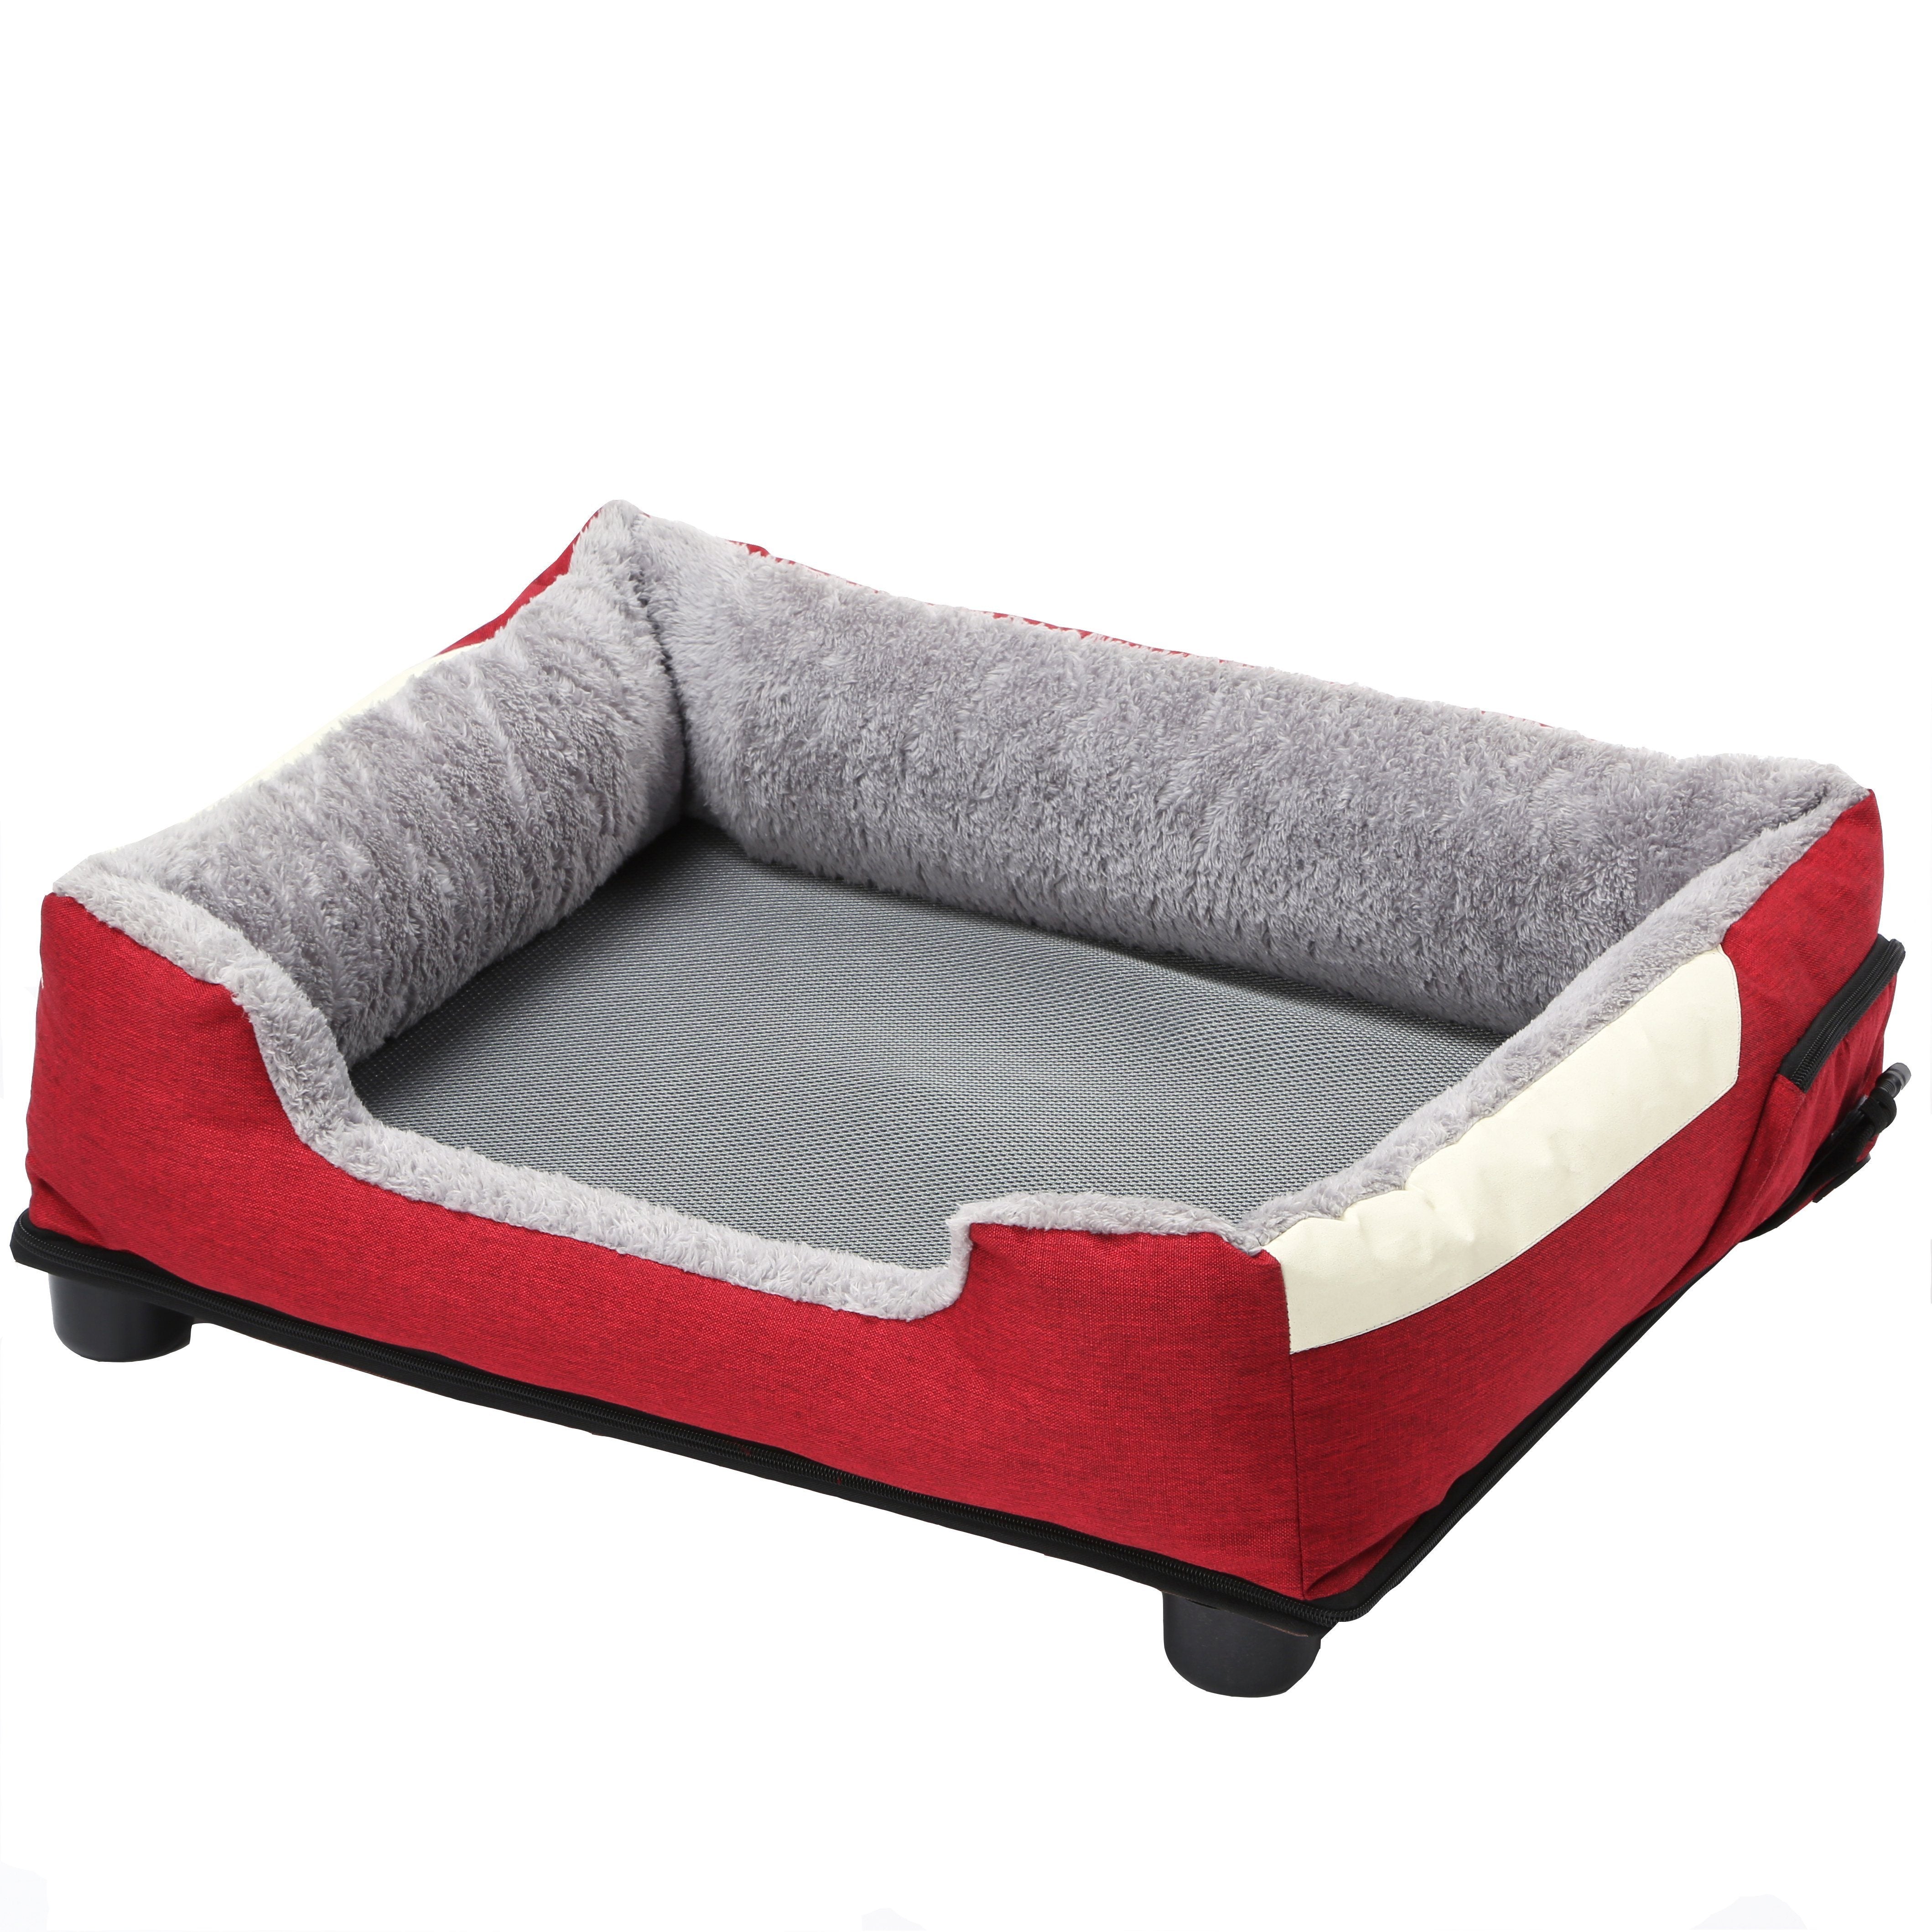 Pet Life "Dream Smart" Electronic Heating and Cooling Smart Dog Bed Medium Burgundy Red